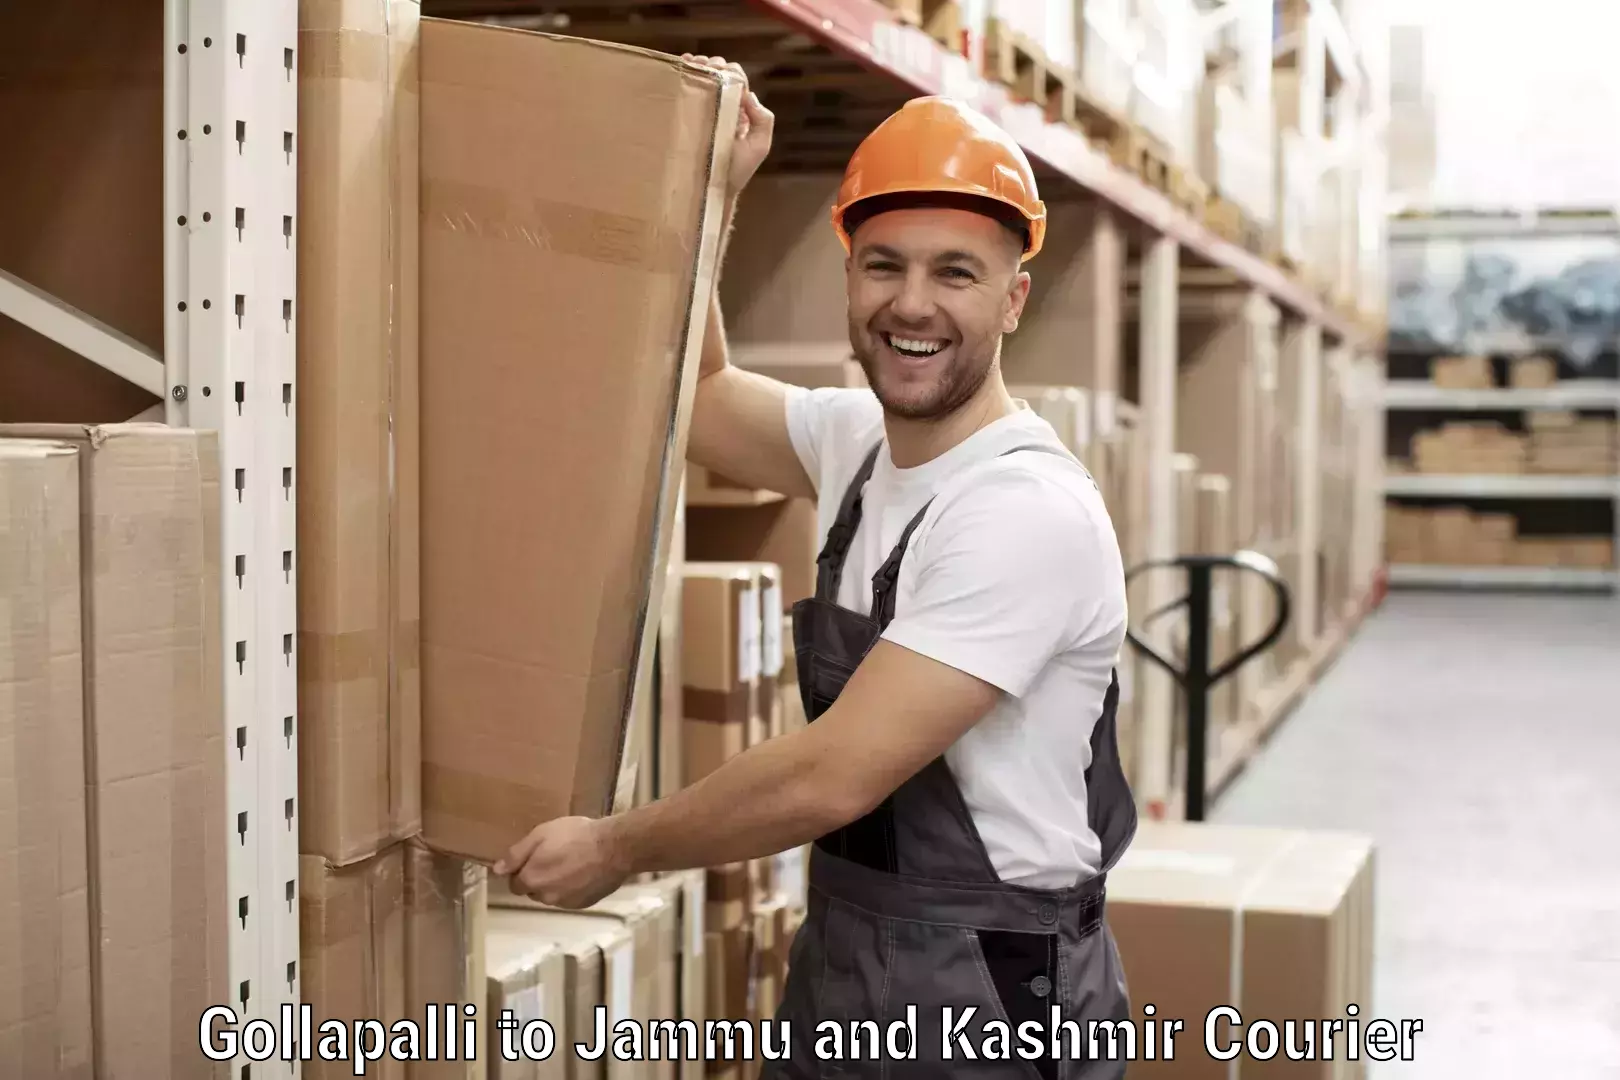 Global shipping networks Gollapalli to Jammu and Kashmir